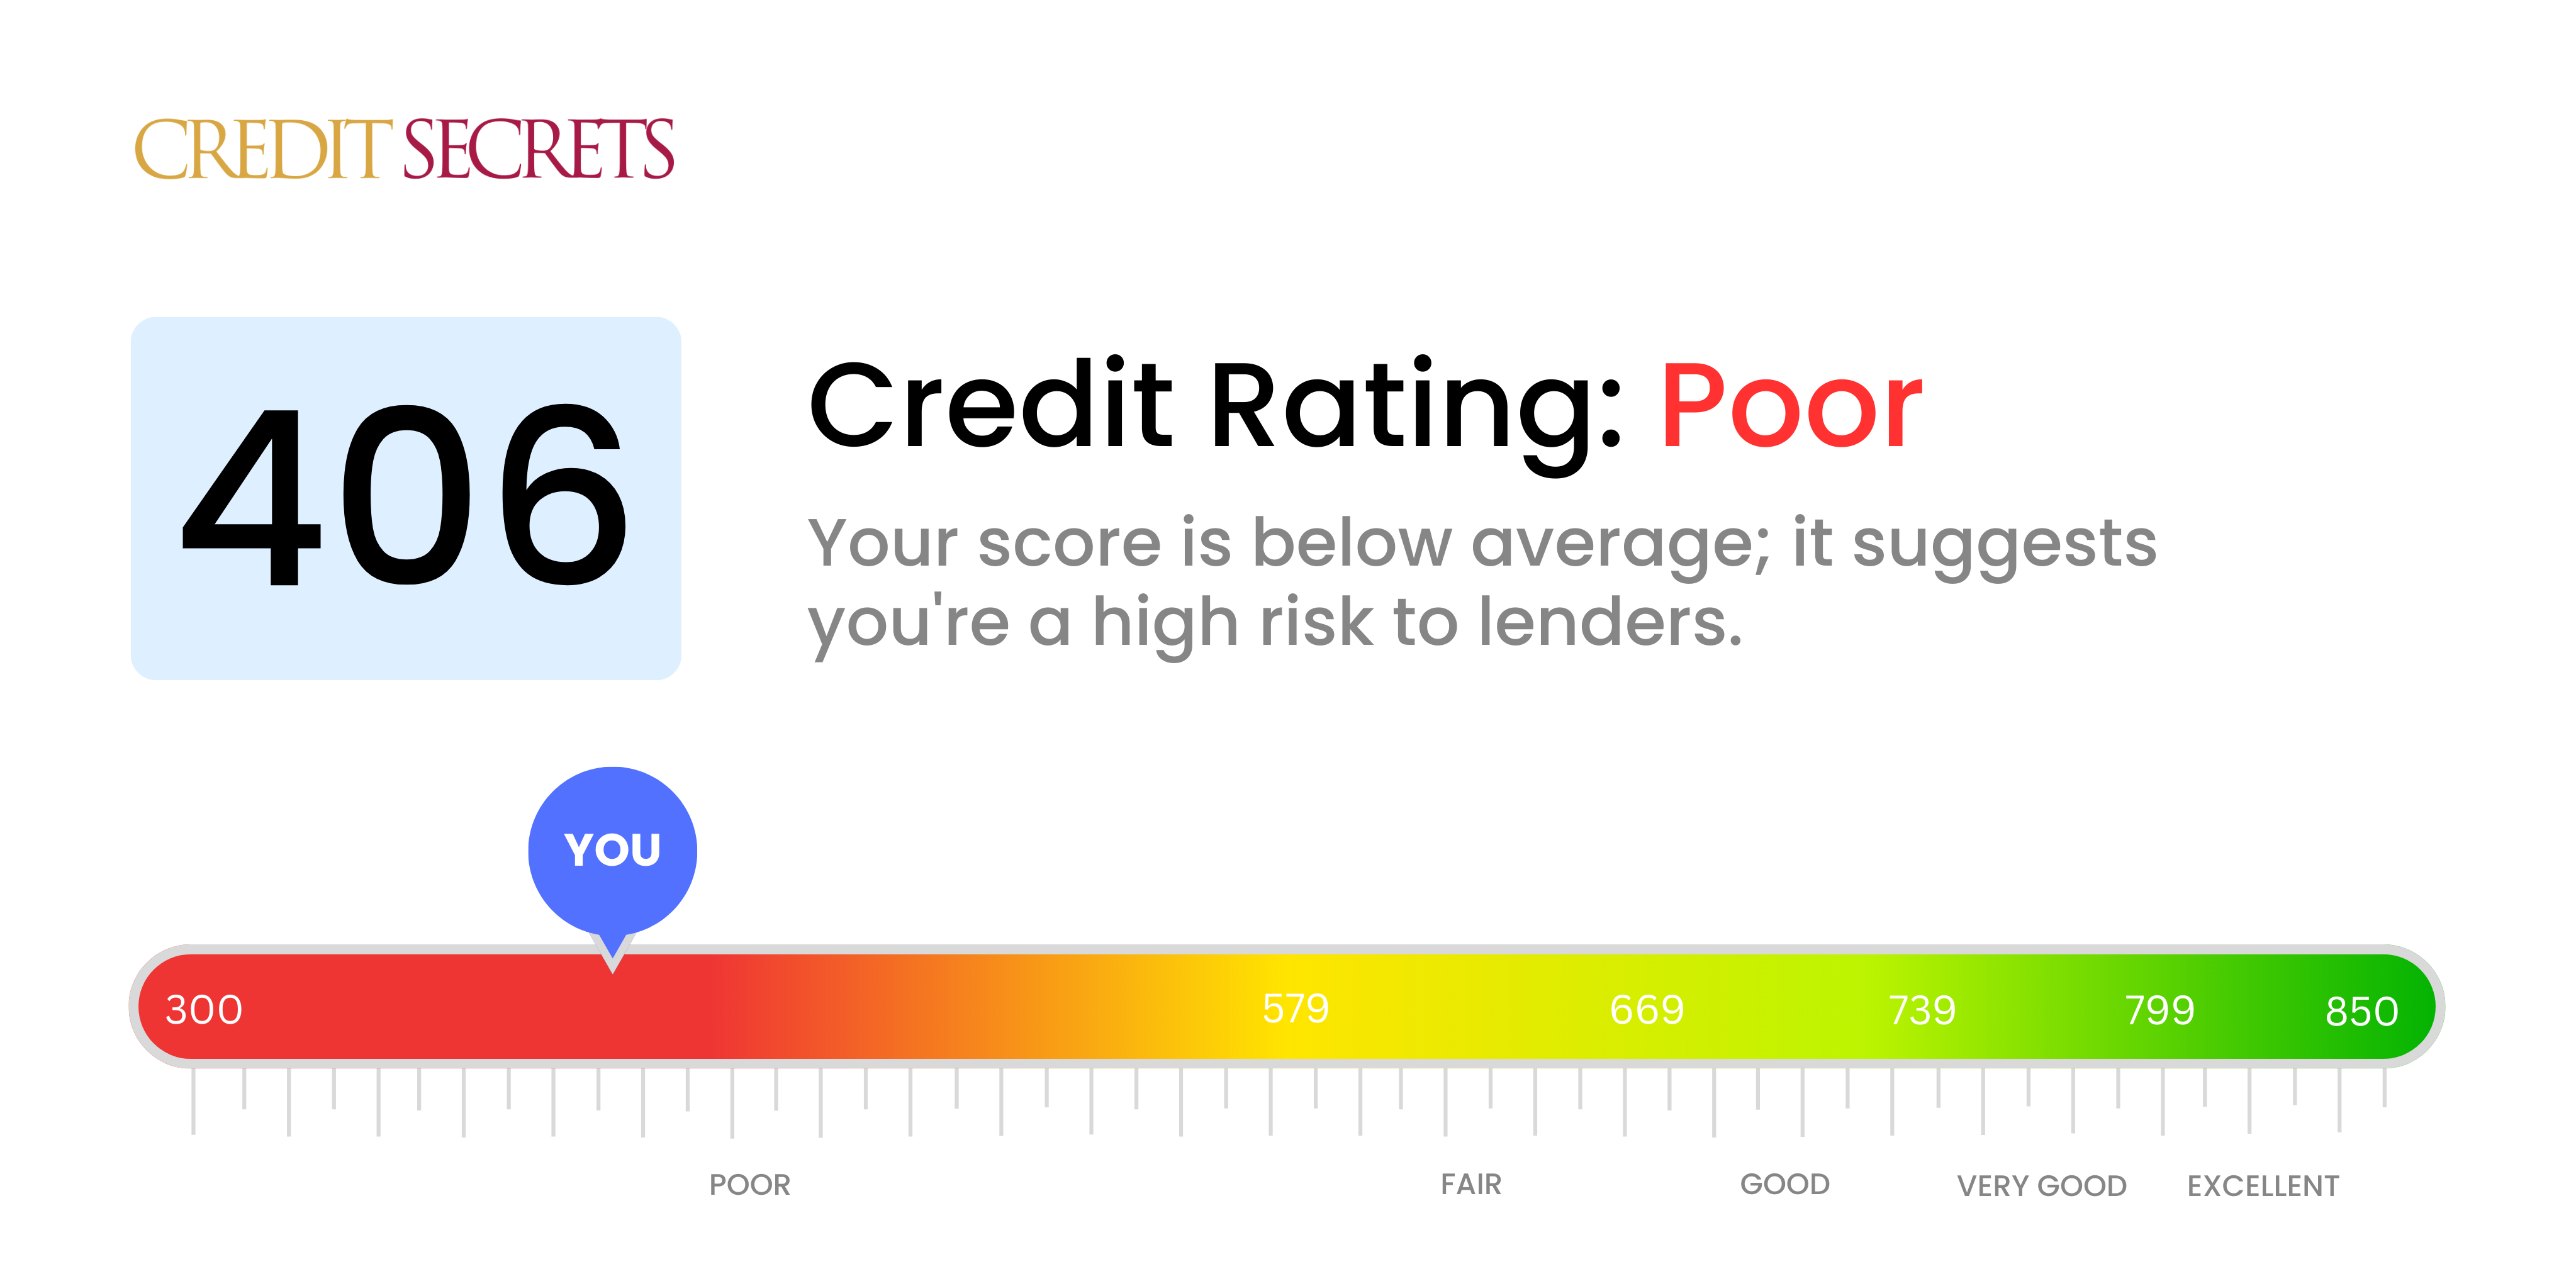 Is 406 a good credit score?